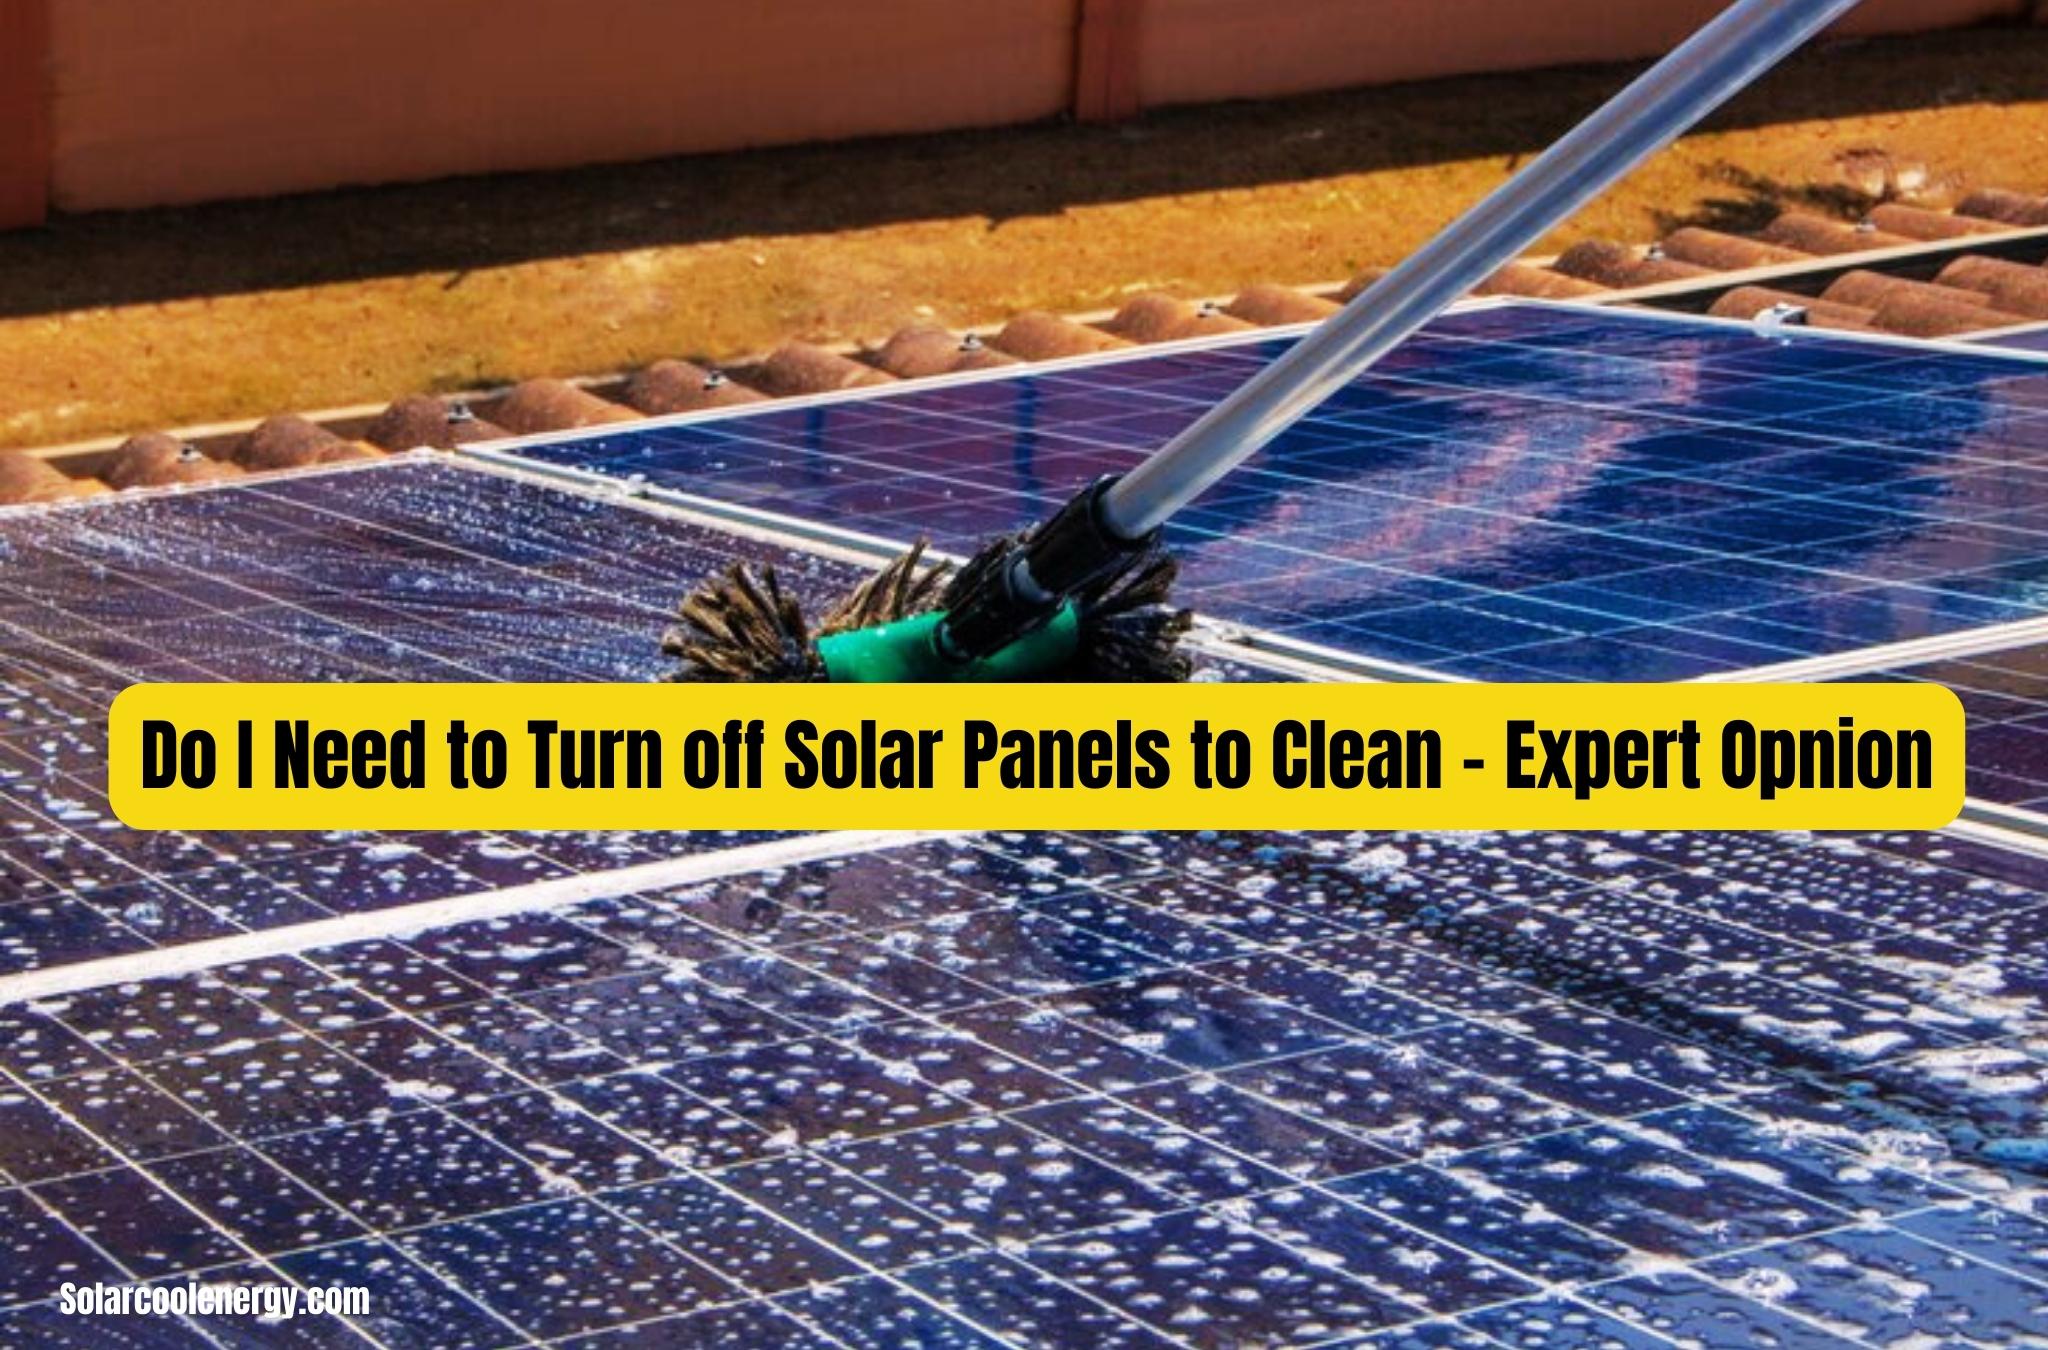 Do I Need to Turn off Solar Panels to Clean